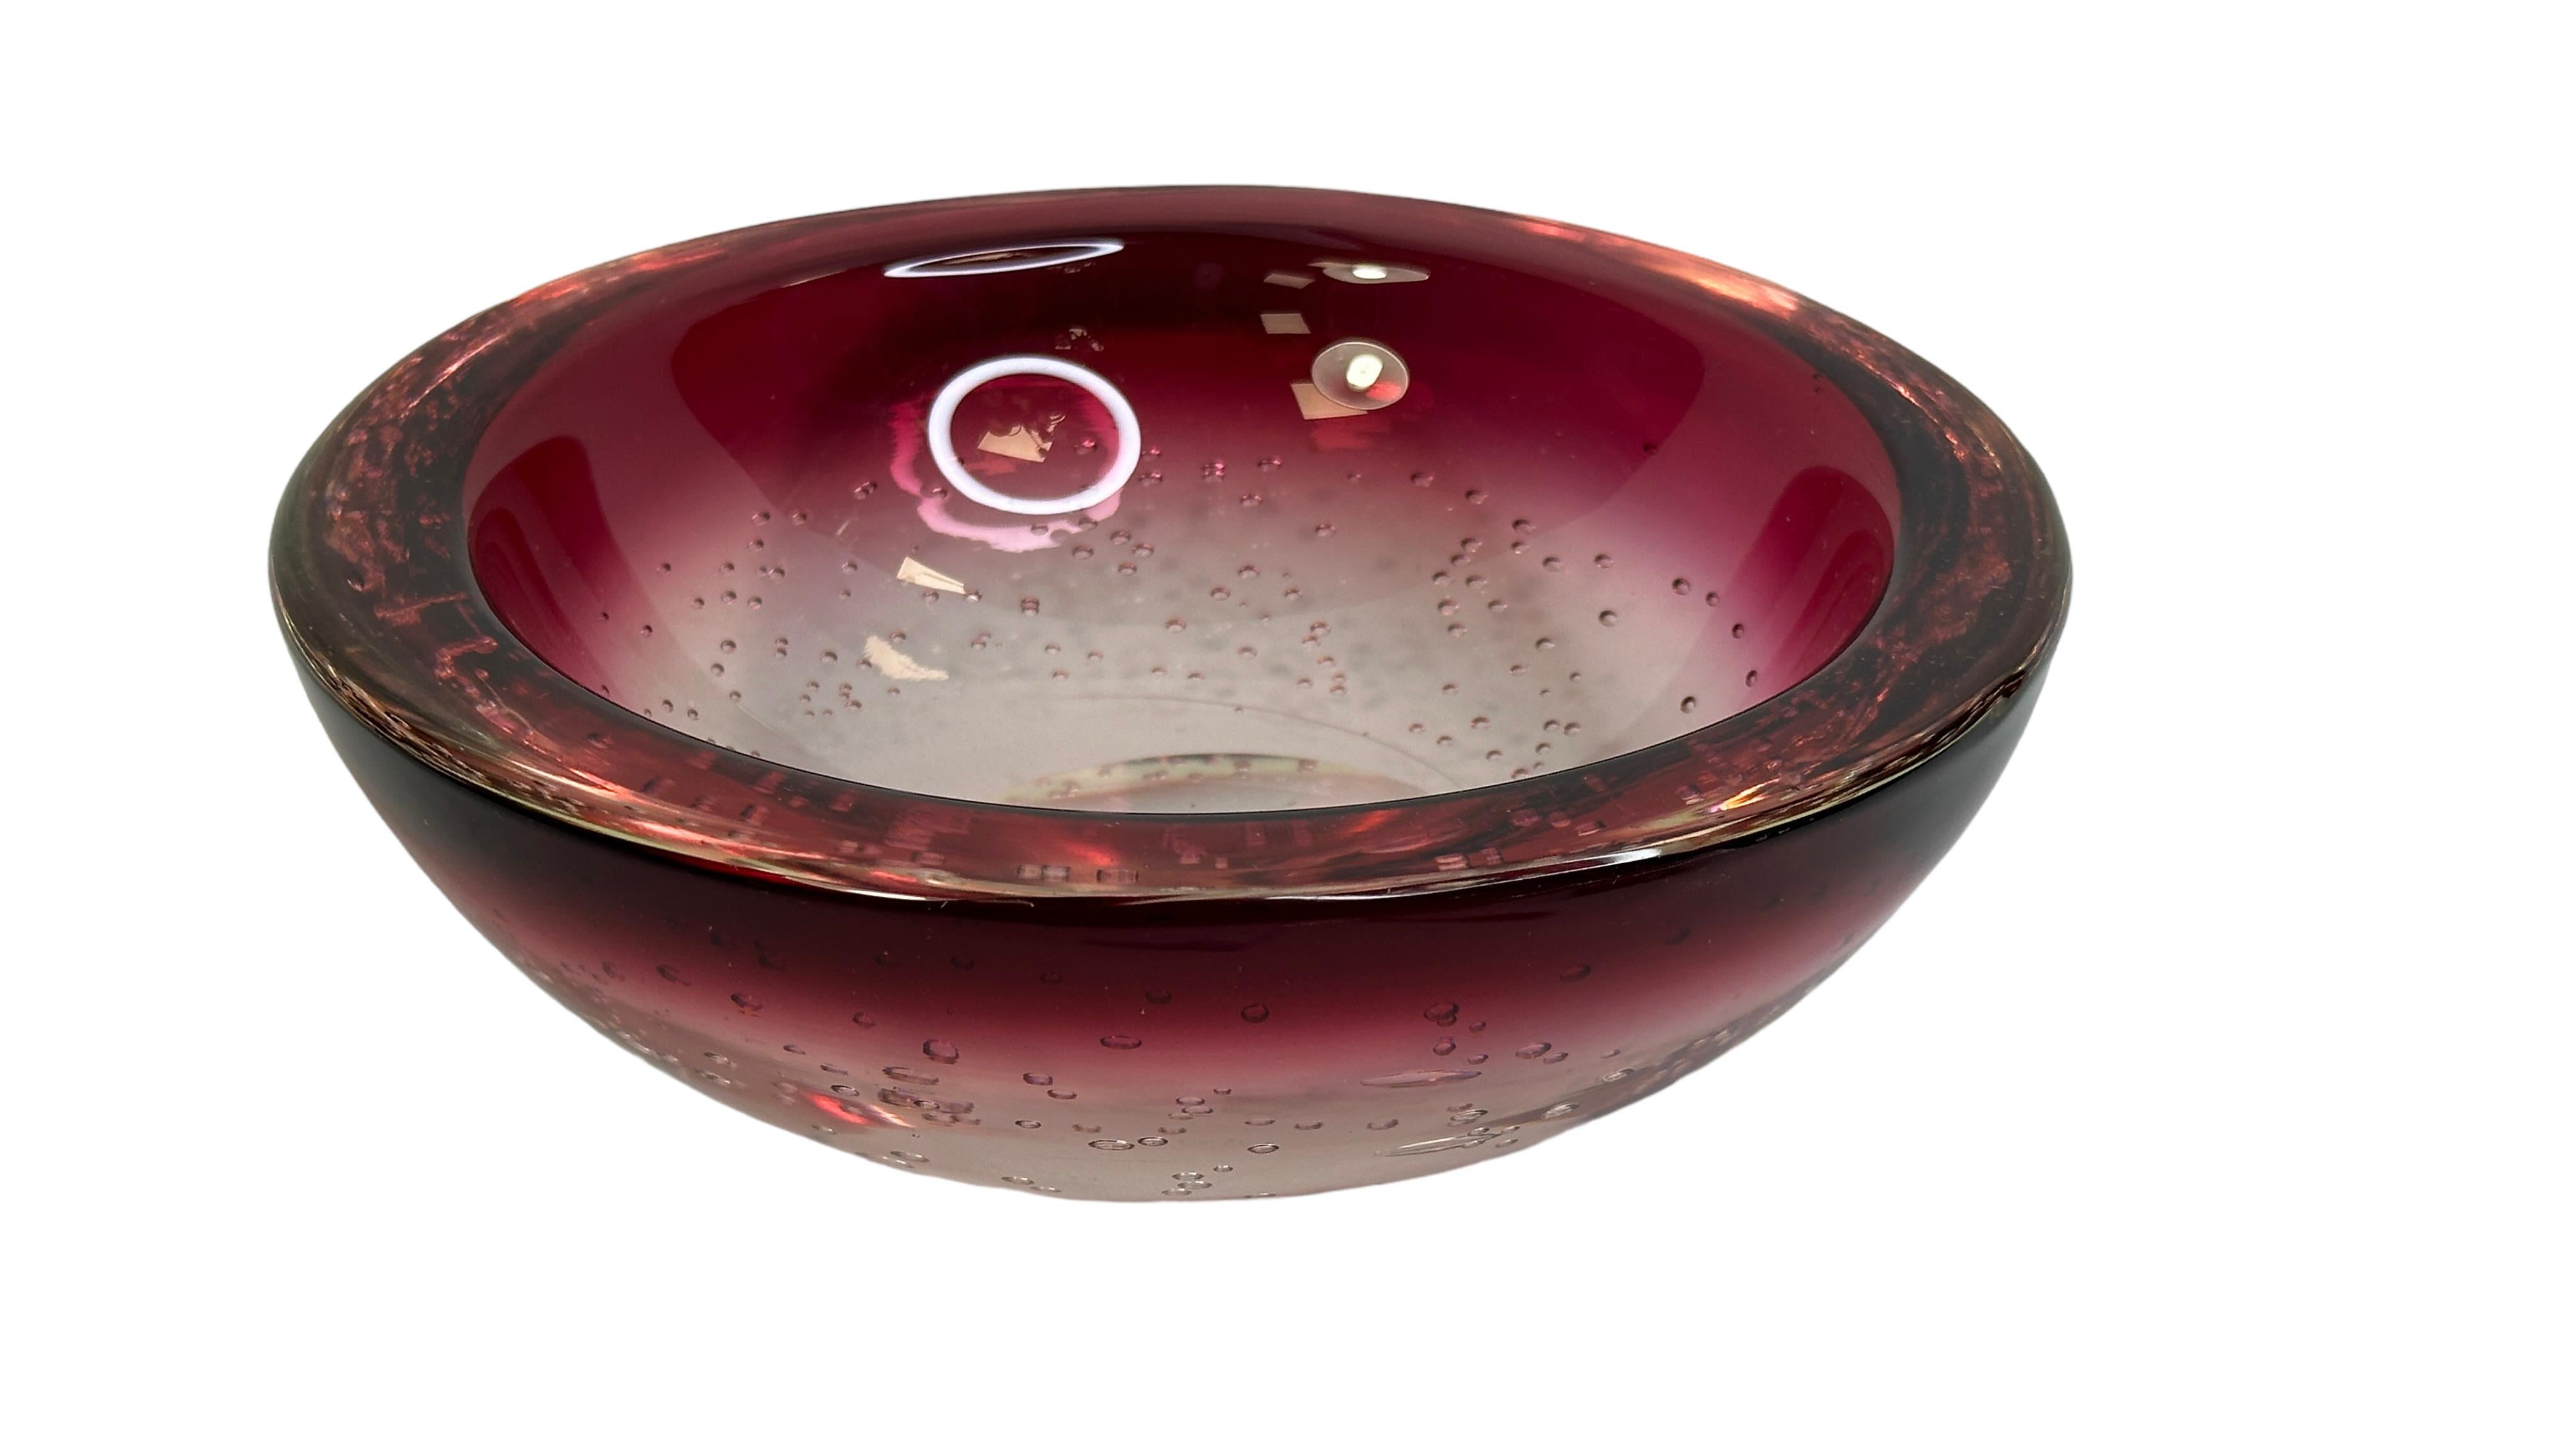 Gorgeous hand blown Murano art glass piece with Sommerso and bullicante techniques. A beautiful organic shaped bowl, catchall or centrepiece, Venice, Murano, Italy, 1980s. Colors are red and clear, with little air bubbles inside. A nice addition to